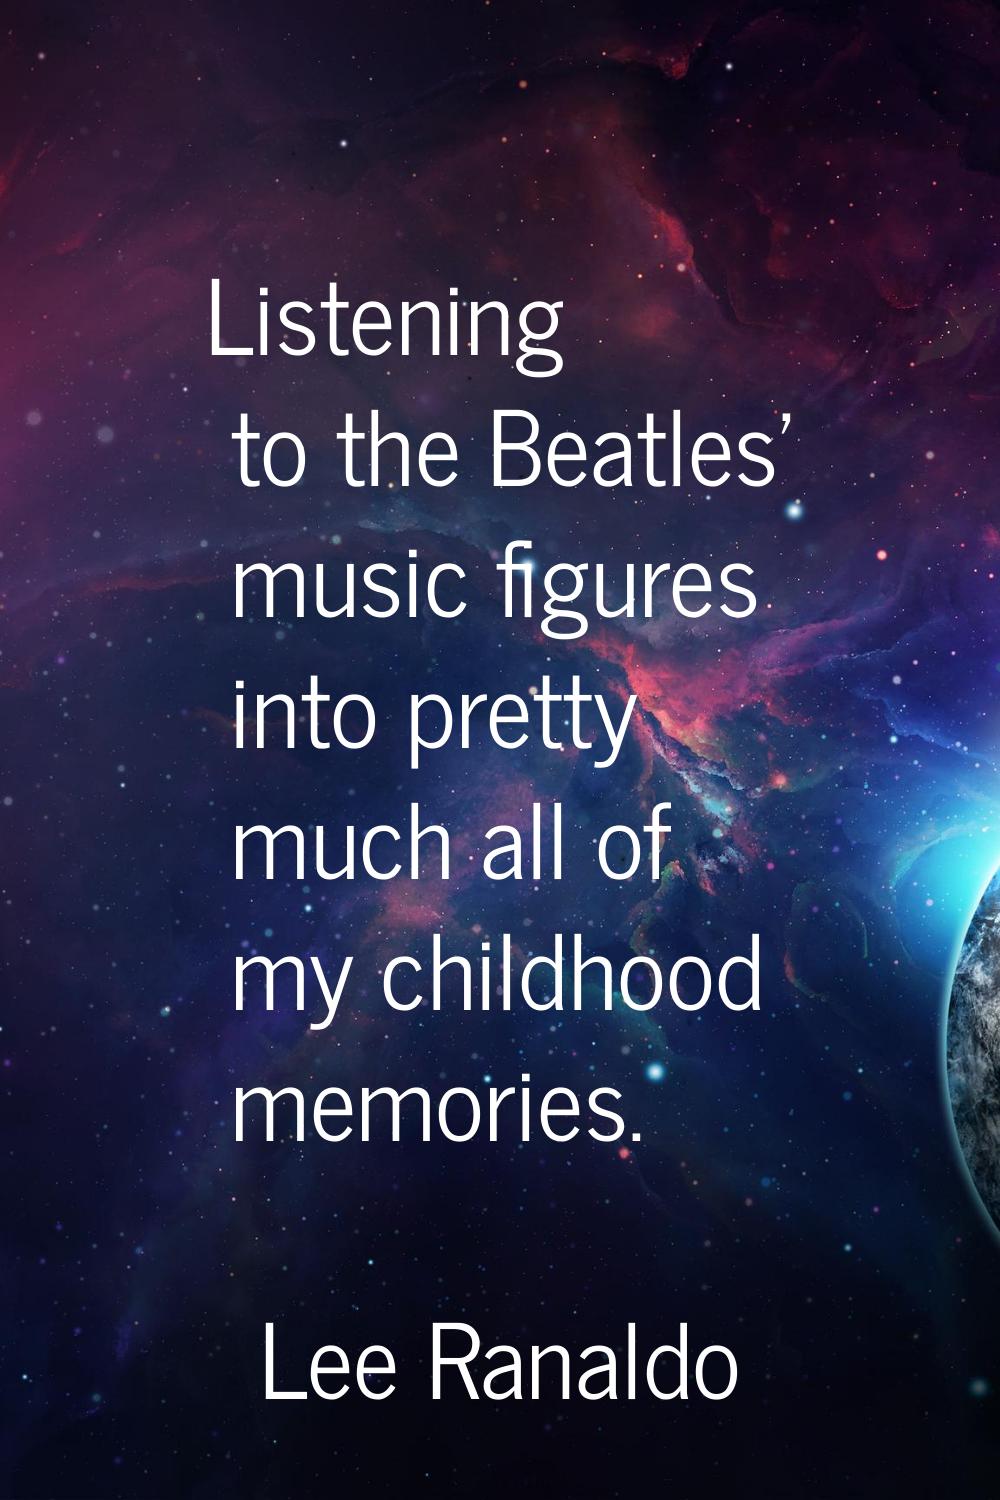 Listening to the Beatles' music figures into pretty much all of my childhood memories.